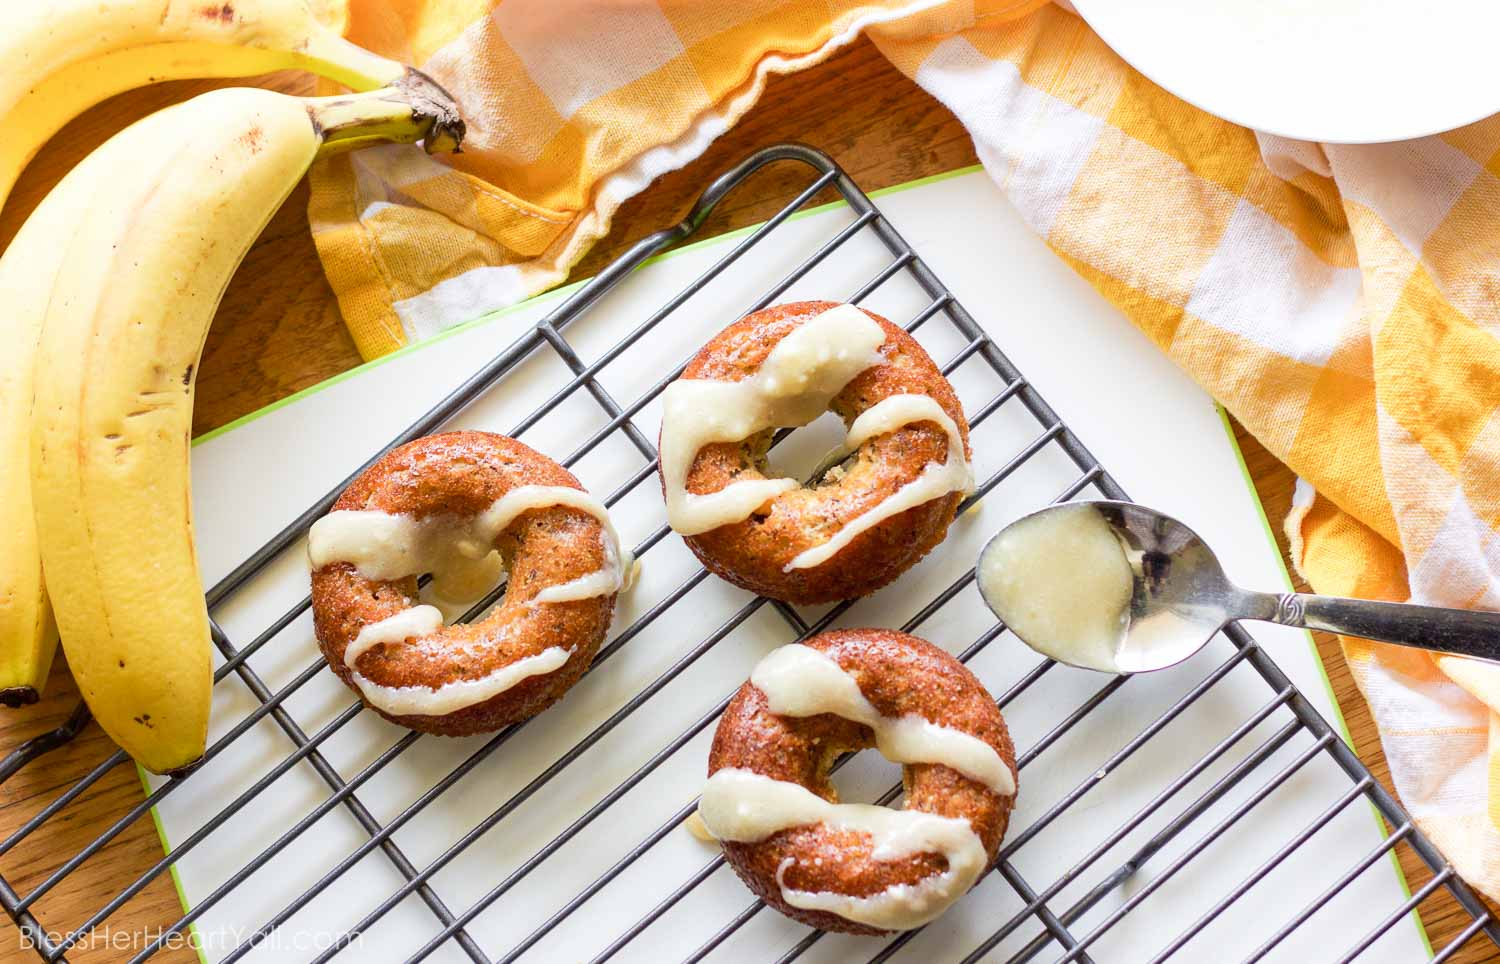 These gluten-free banana bread donuts are a great reason to wake up in the morning! Soft and moist banana bread is baked into fluffy donuts and then drizzled with an easy and quick honey cream cheese drizzle.